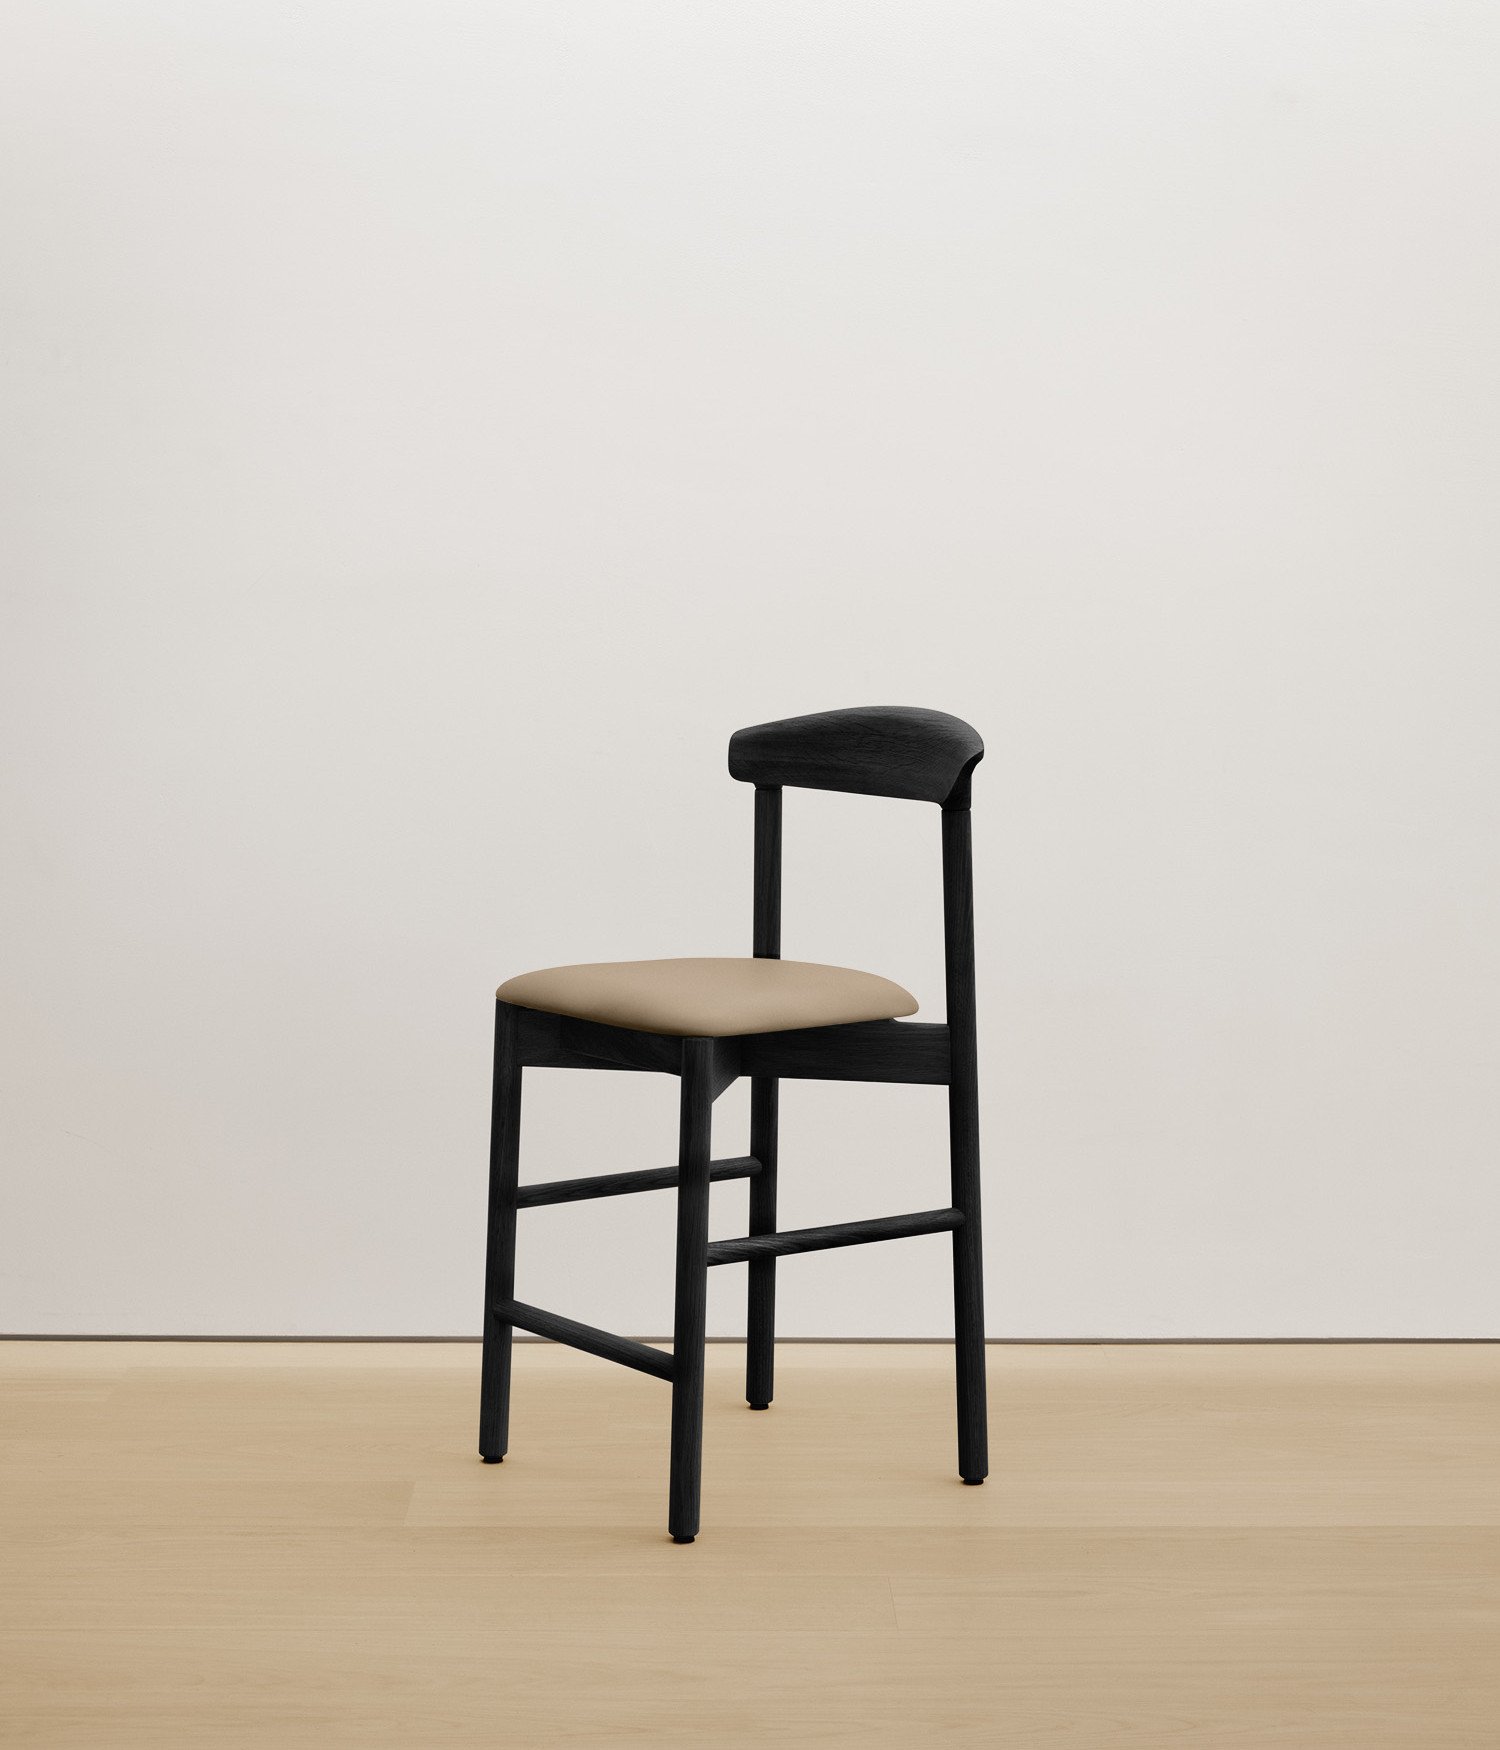  black-stained-oak stool with cream color upholstered seat 